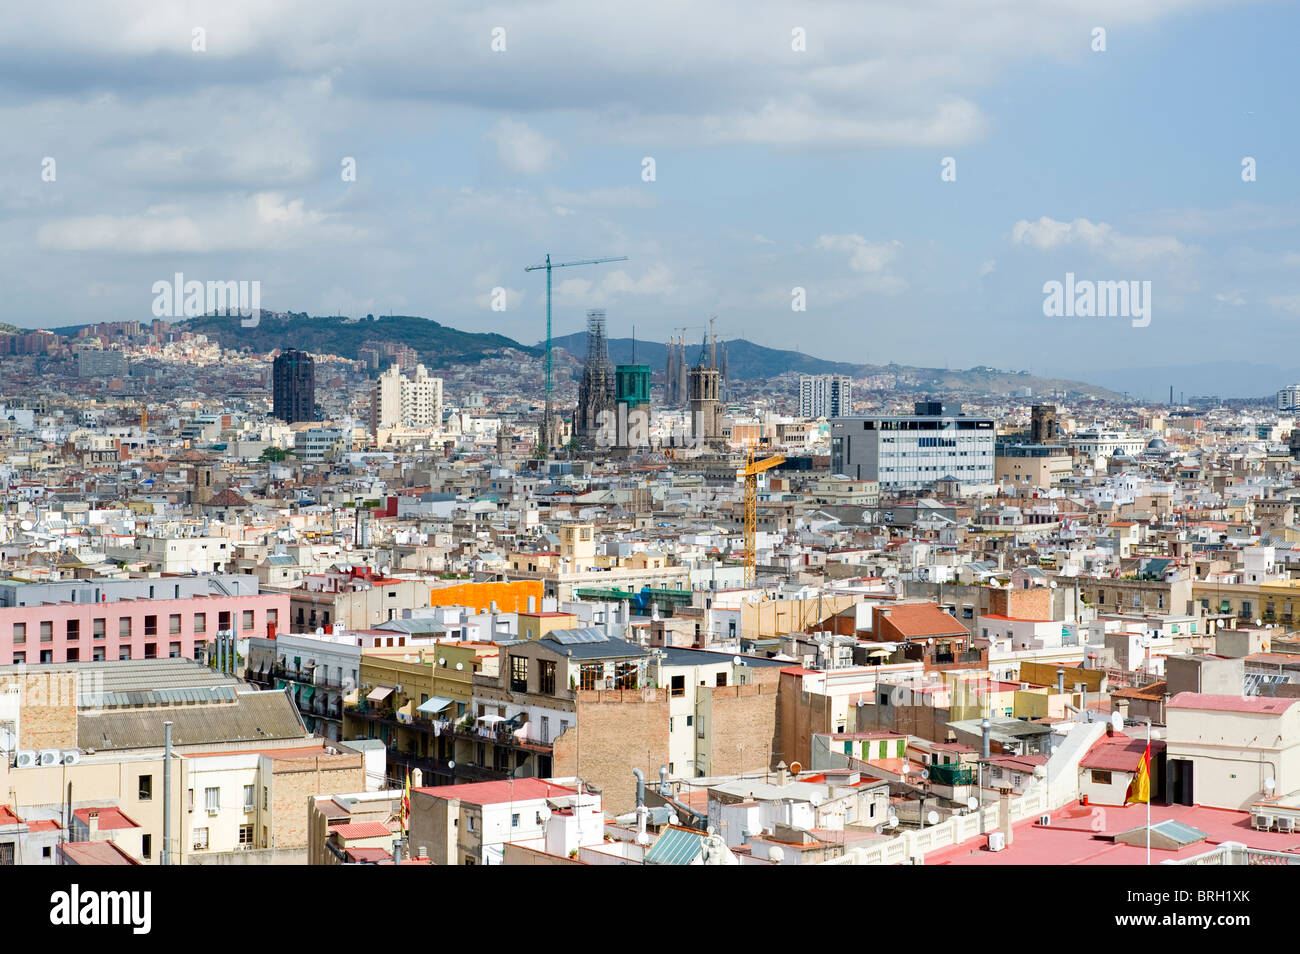 country spain view on the city barcelona Stock Photo